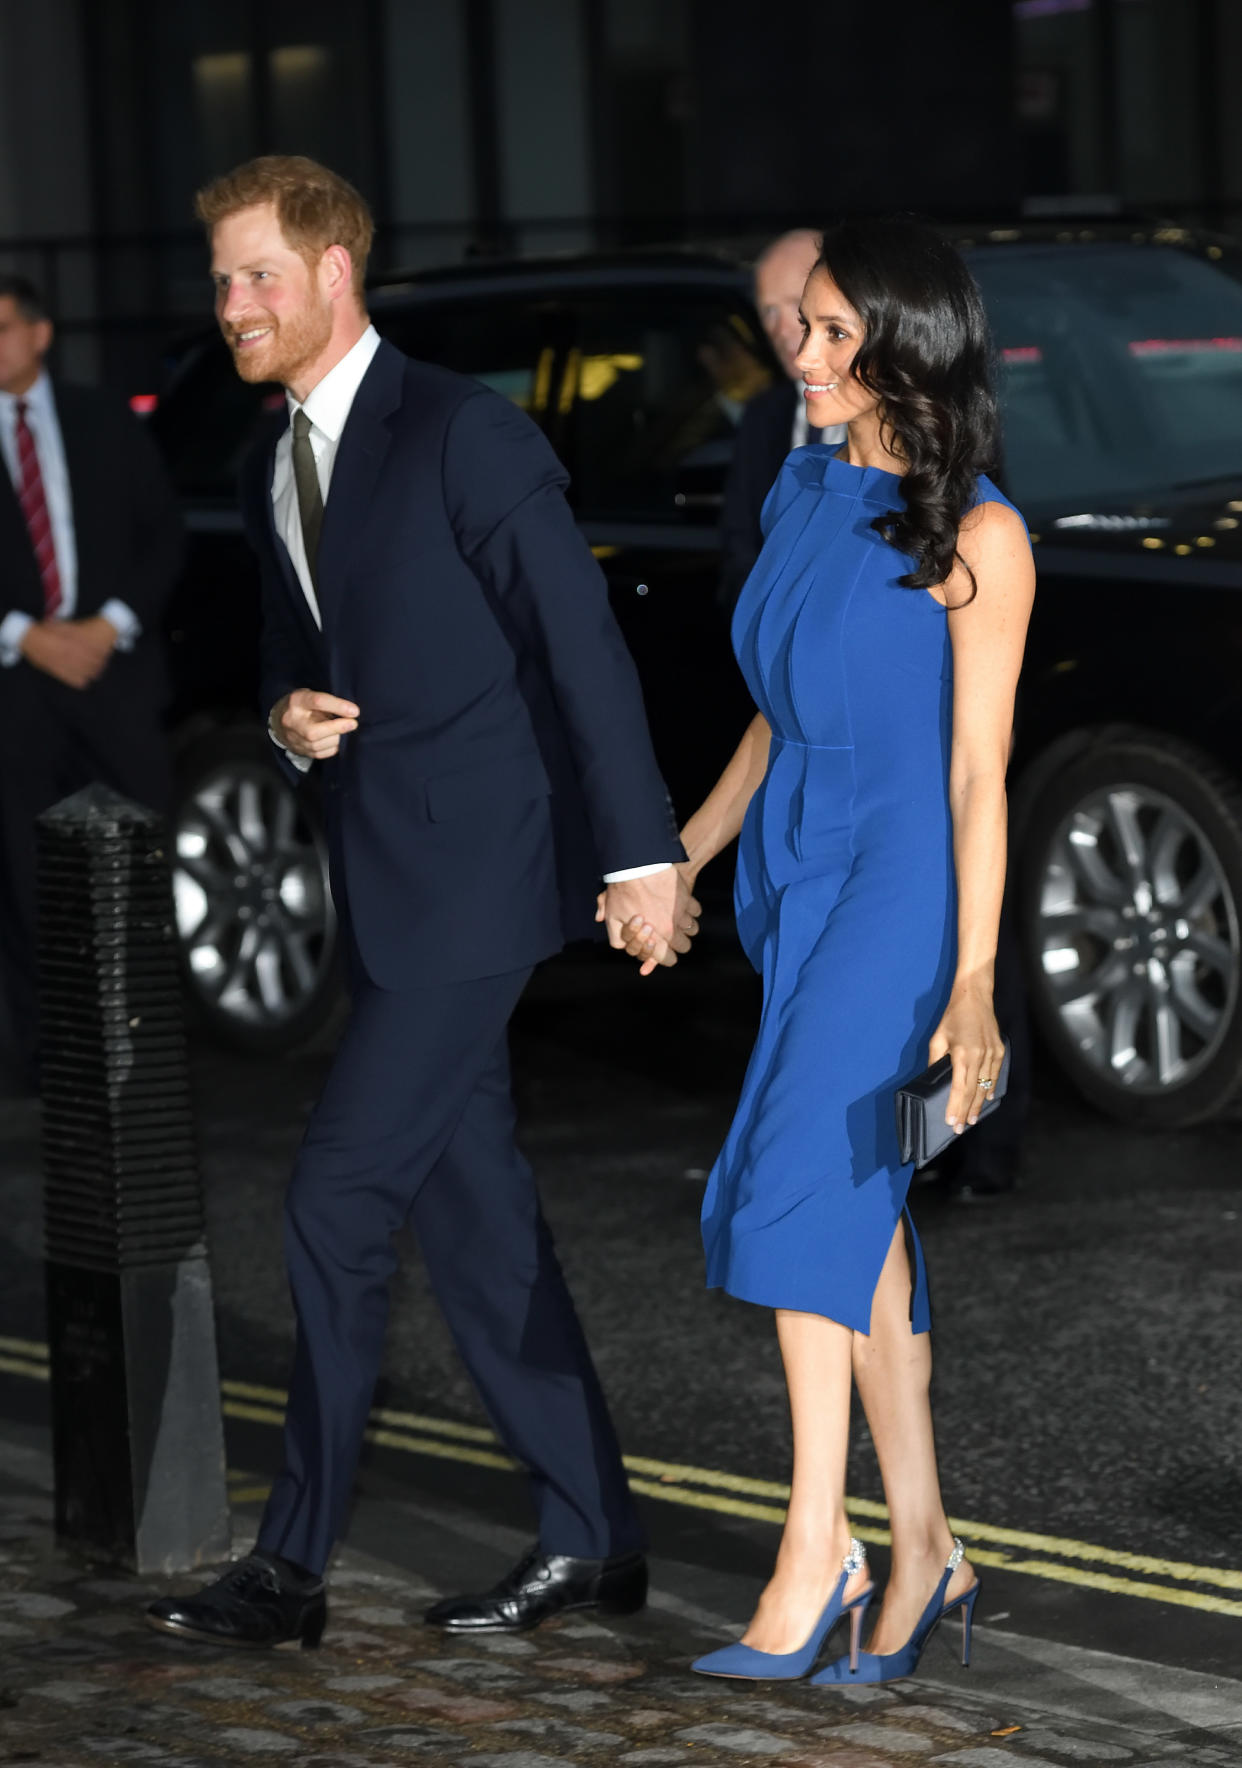 Prince Harry and the Duchess of Sussex arrive at the 100 Days of Peace in London. (Photo: Getty Images)